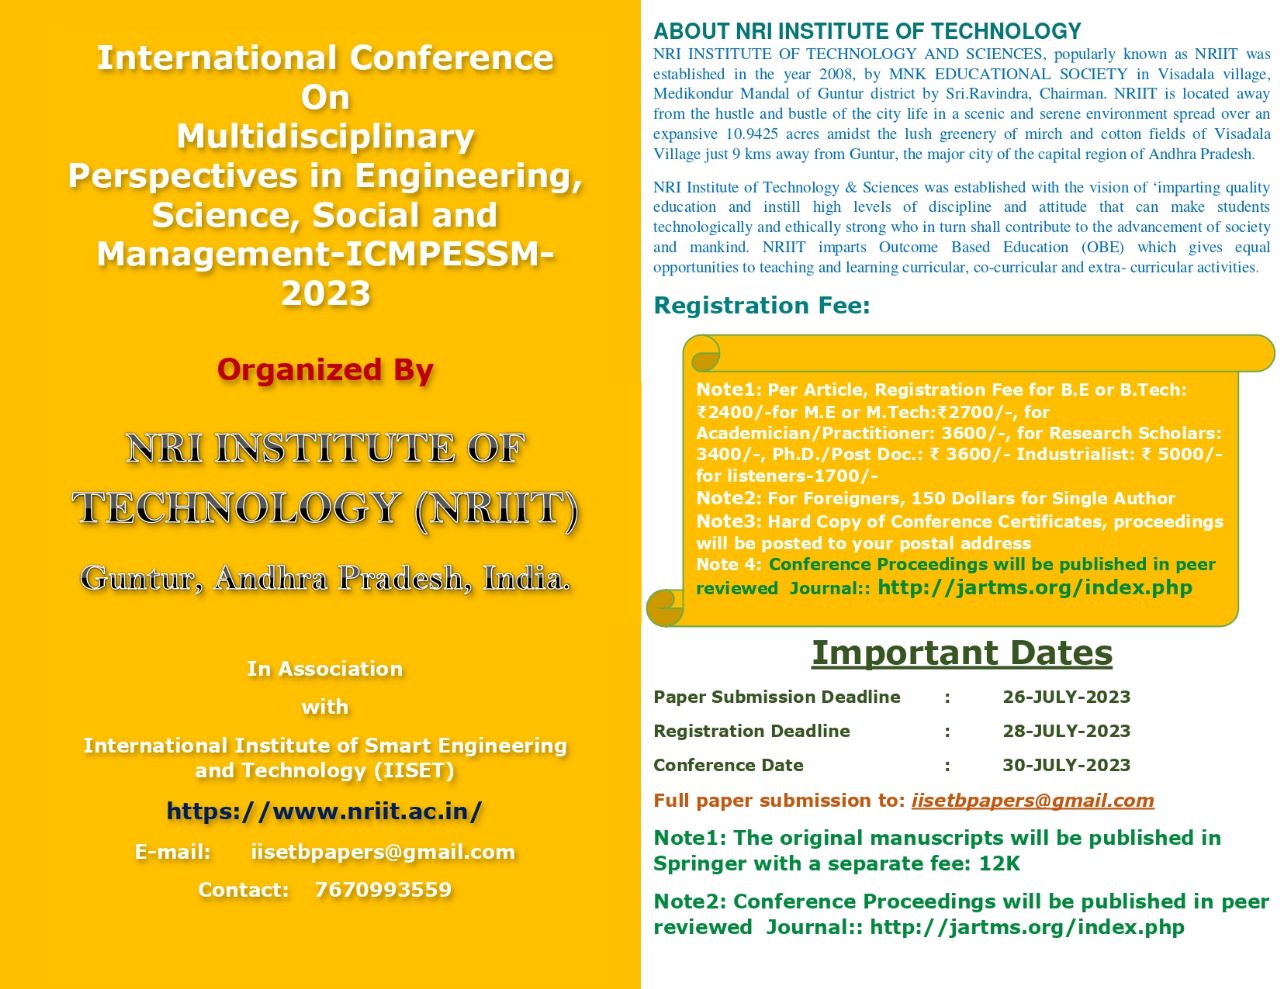 The 2nd International Conference Multidisciplinary Perspectives in Engineering, Science, Social and Management-ICMPESSM-2023